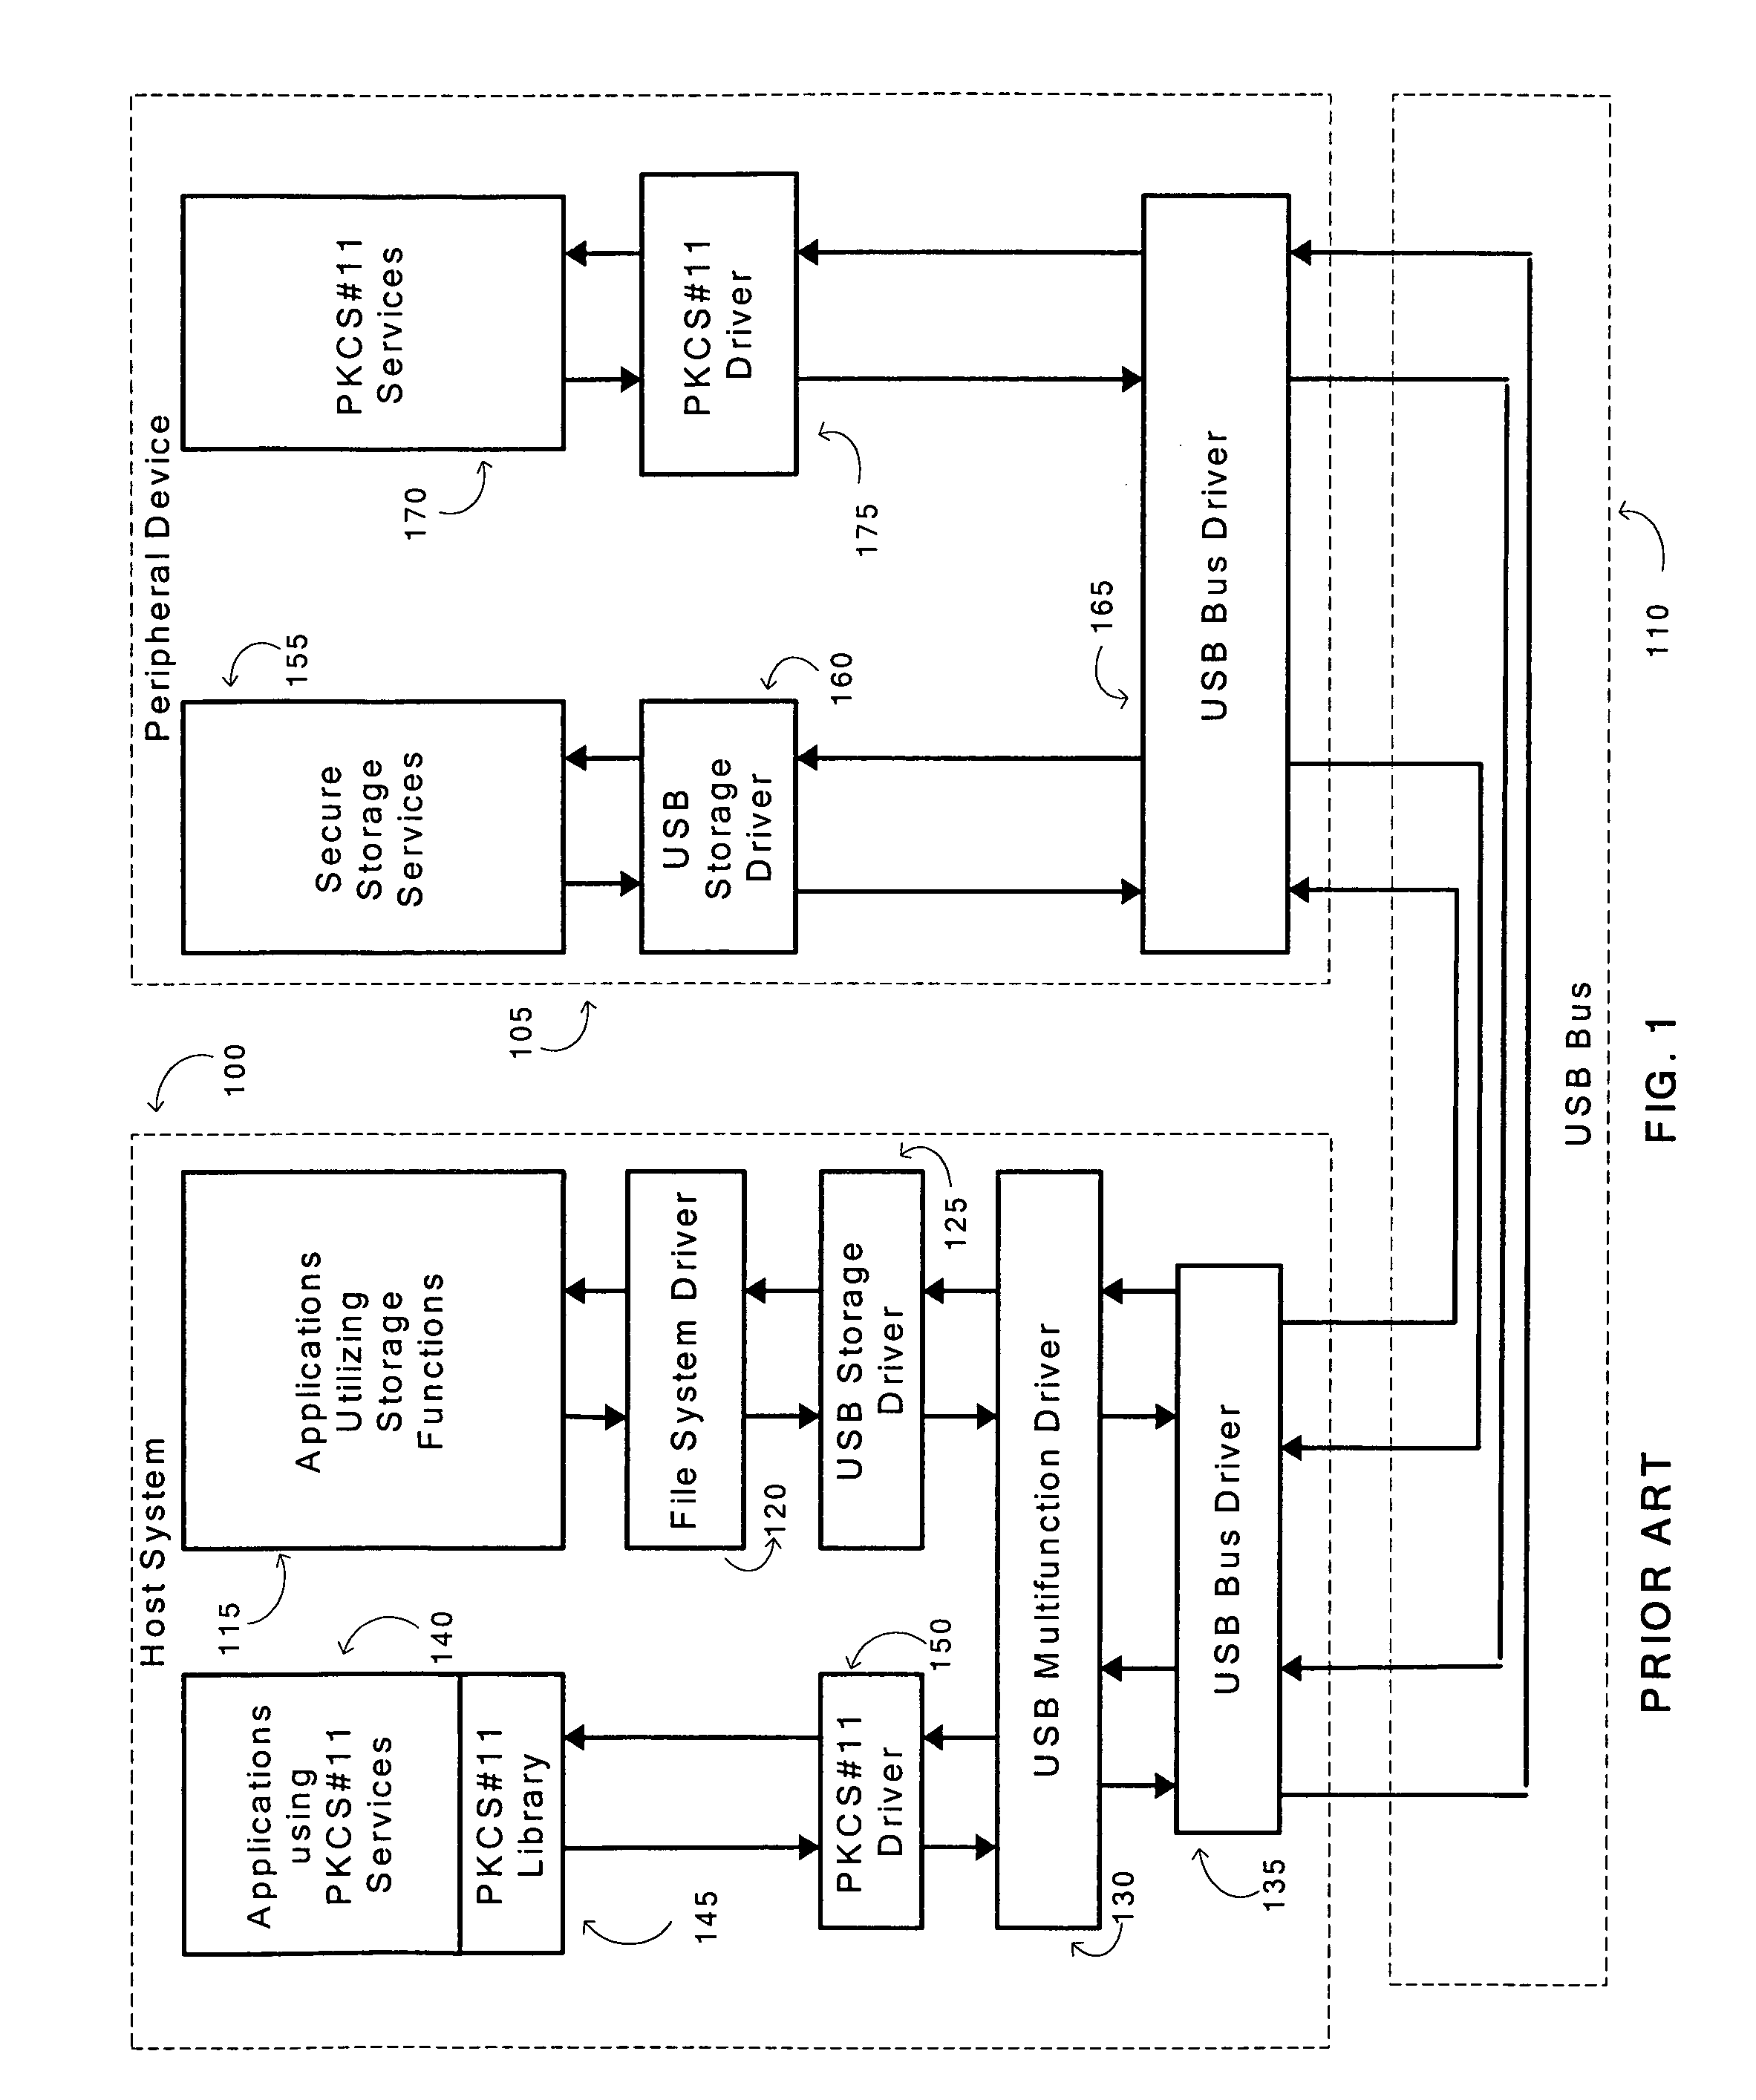 Methods and device for implementing multifunction peripheral devices with a single standard peripheral device driver